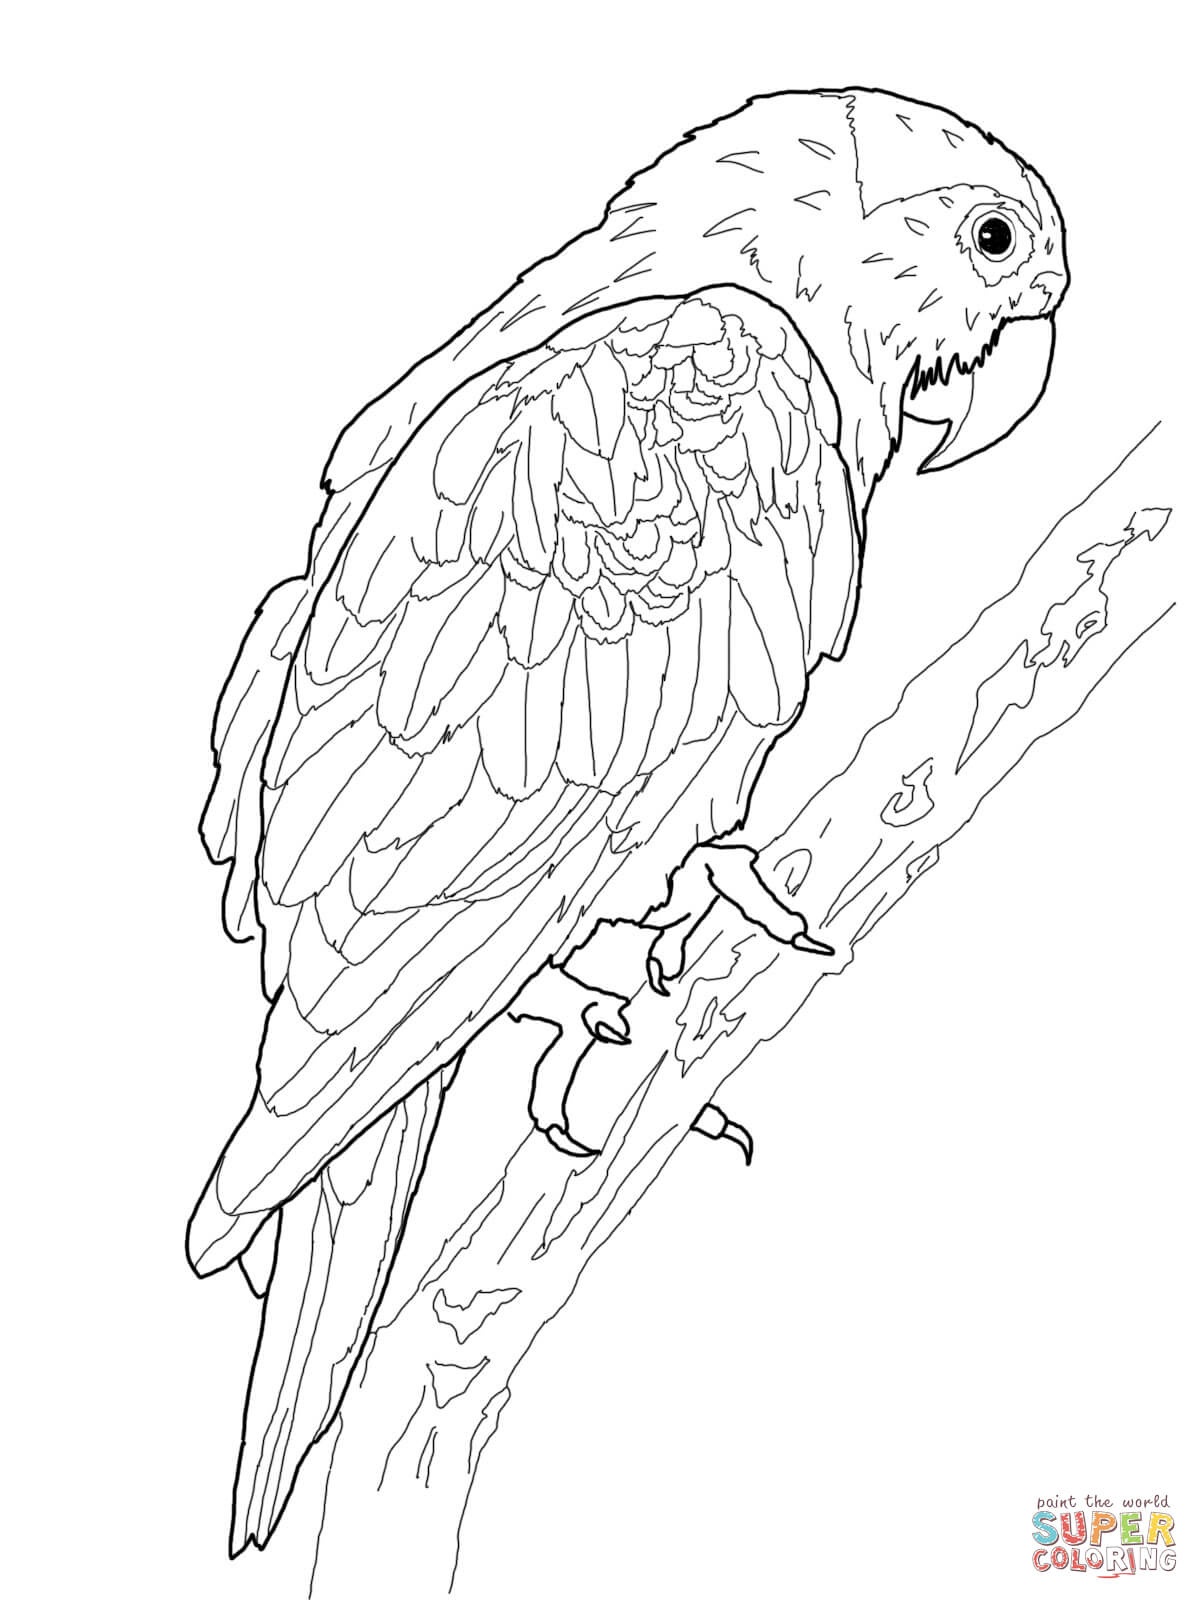 Parrots Coloring Pages | Free Coloring Pages - Free Printable Parrot Coloring Pages